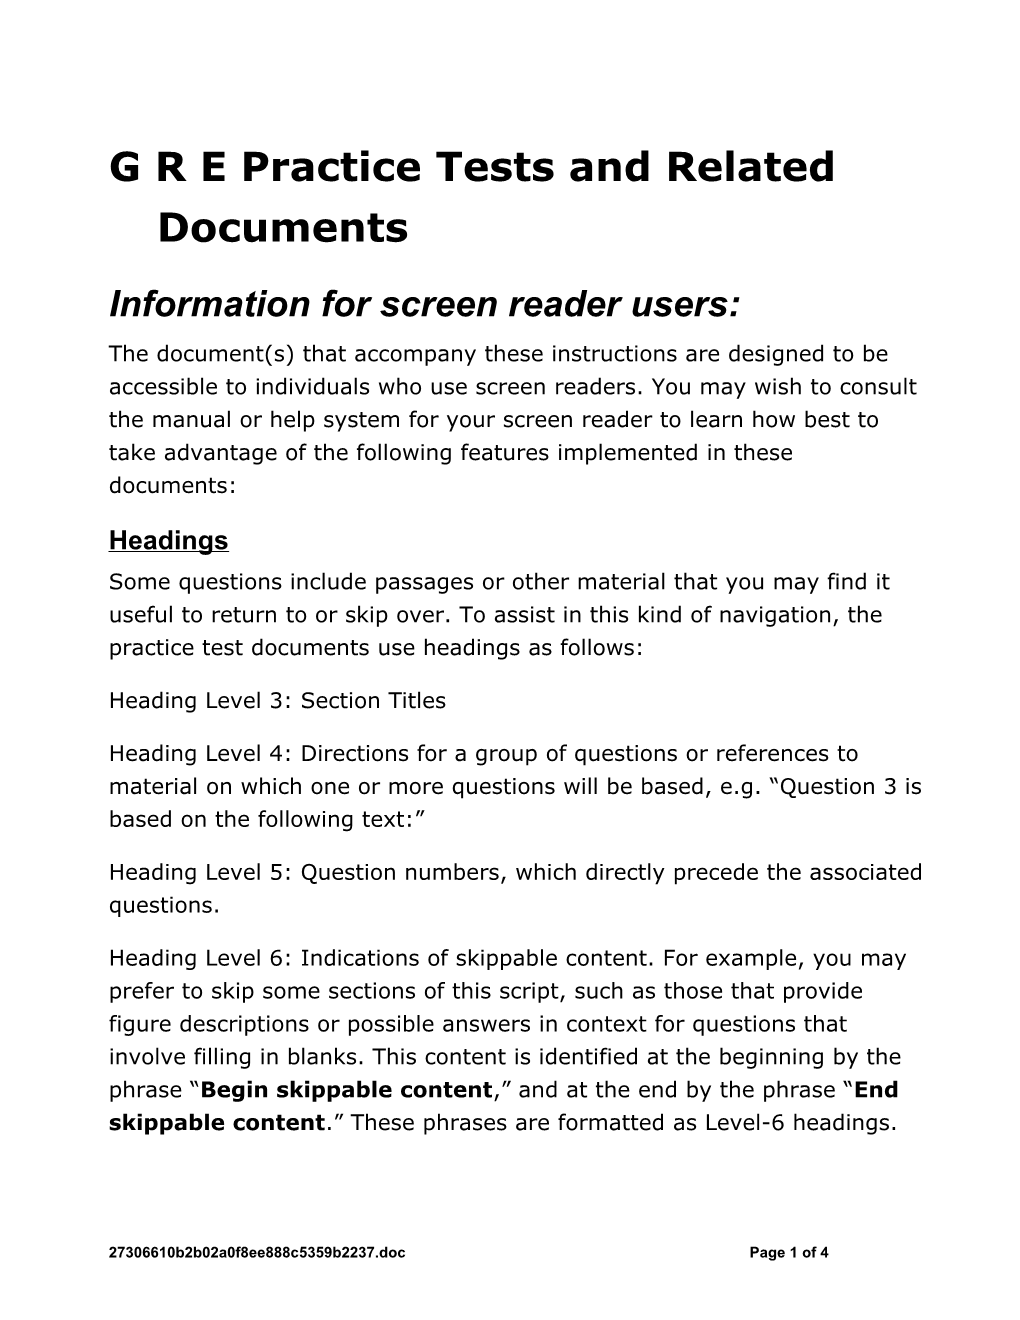 Information for Screen Reader Users